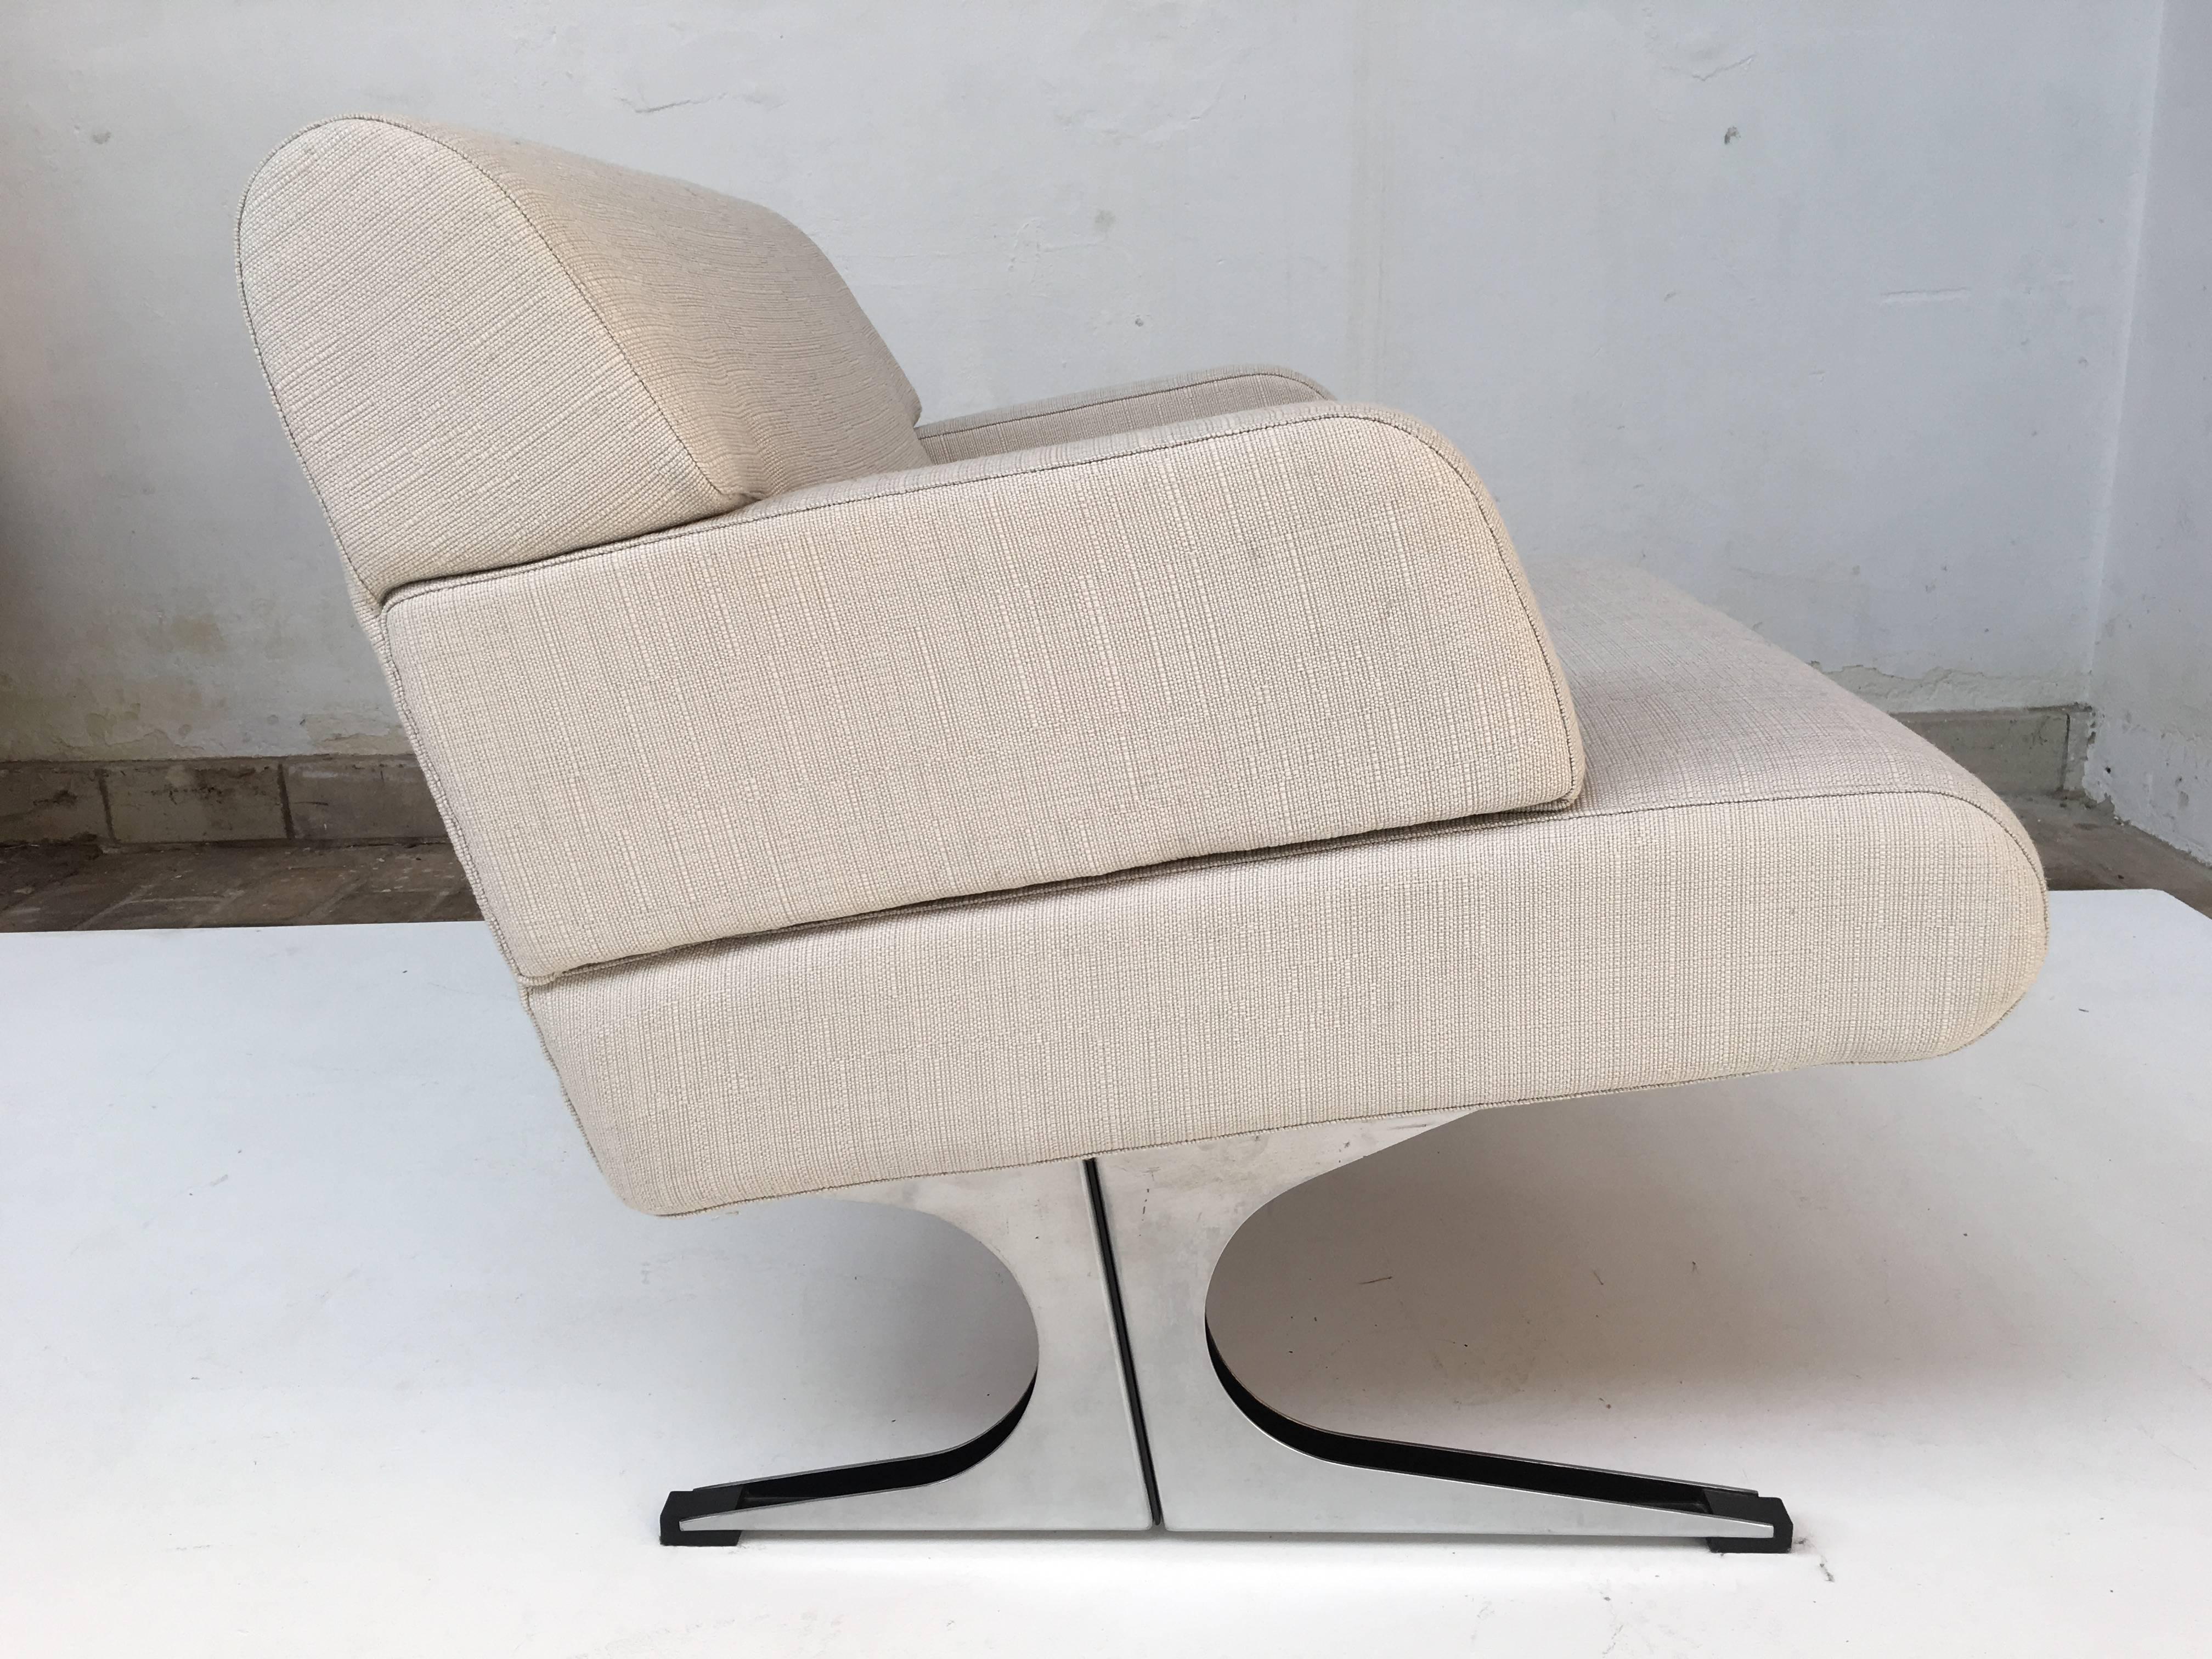 A monumental and rare pair of SZ11 lounge chairs designed by Martin Visser for 't Spectrum in The Netherlands 1965

These chairs have been in production only for 2 years and therefore a pair is a very rare find

The quality and heaviness of